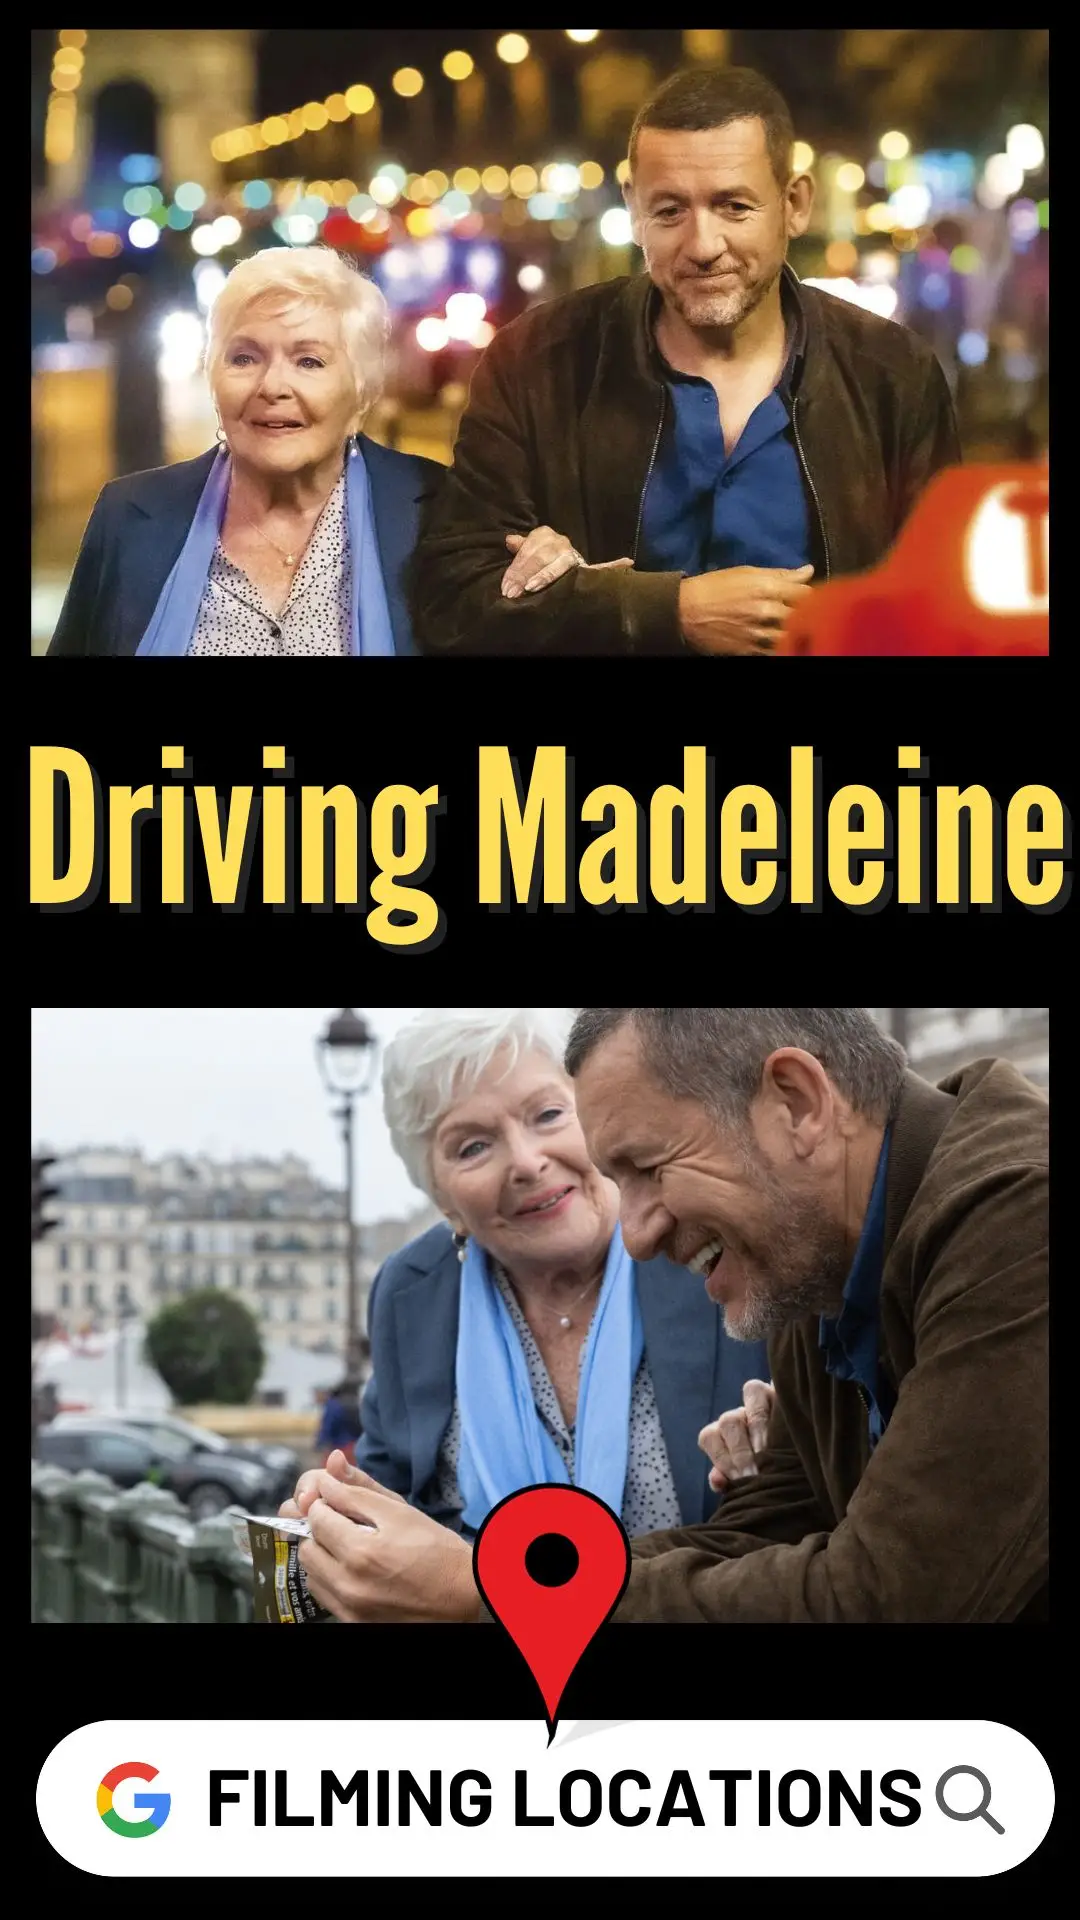 Driving Madeleine Filming Locations